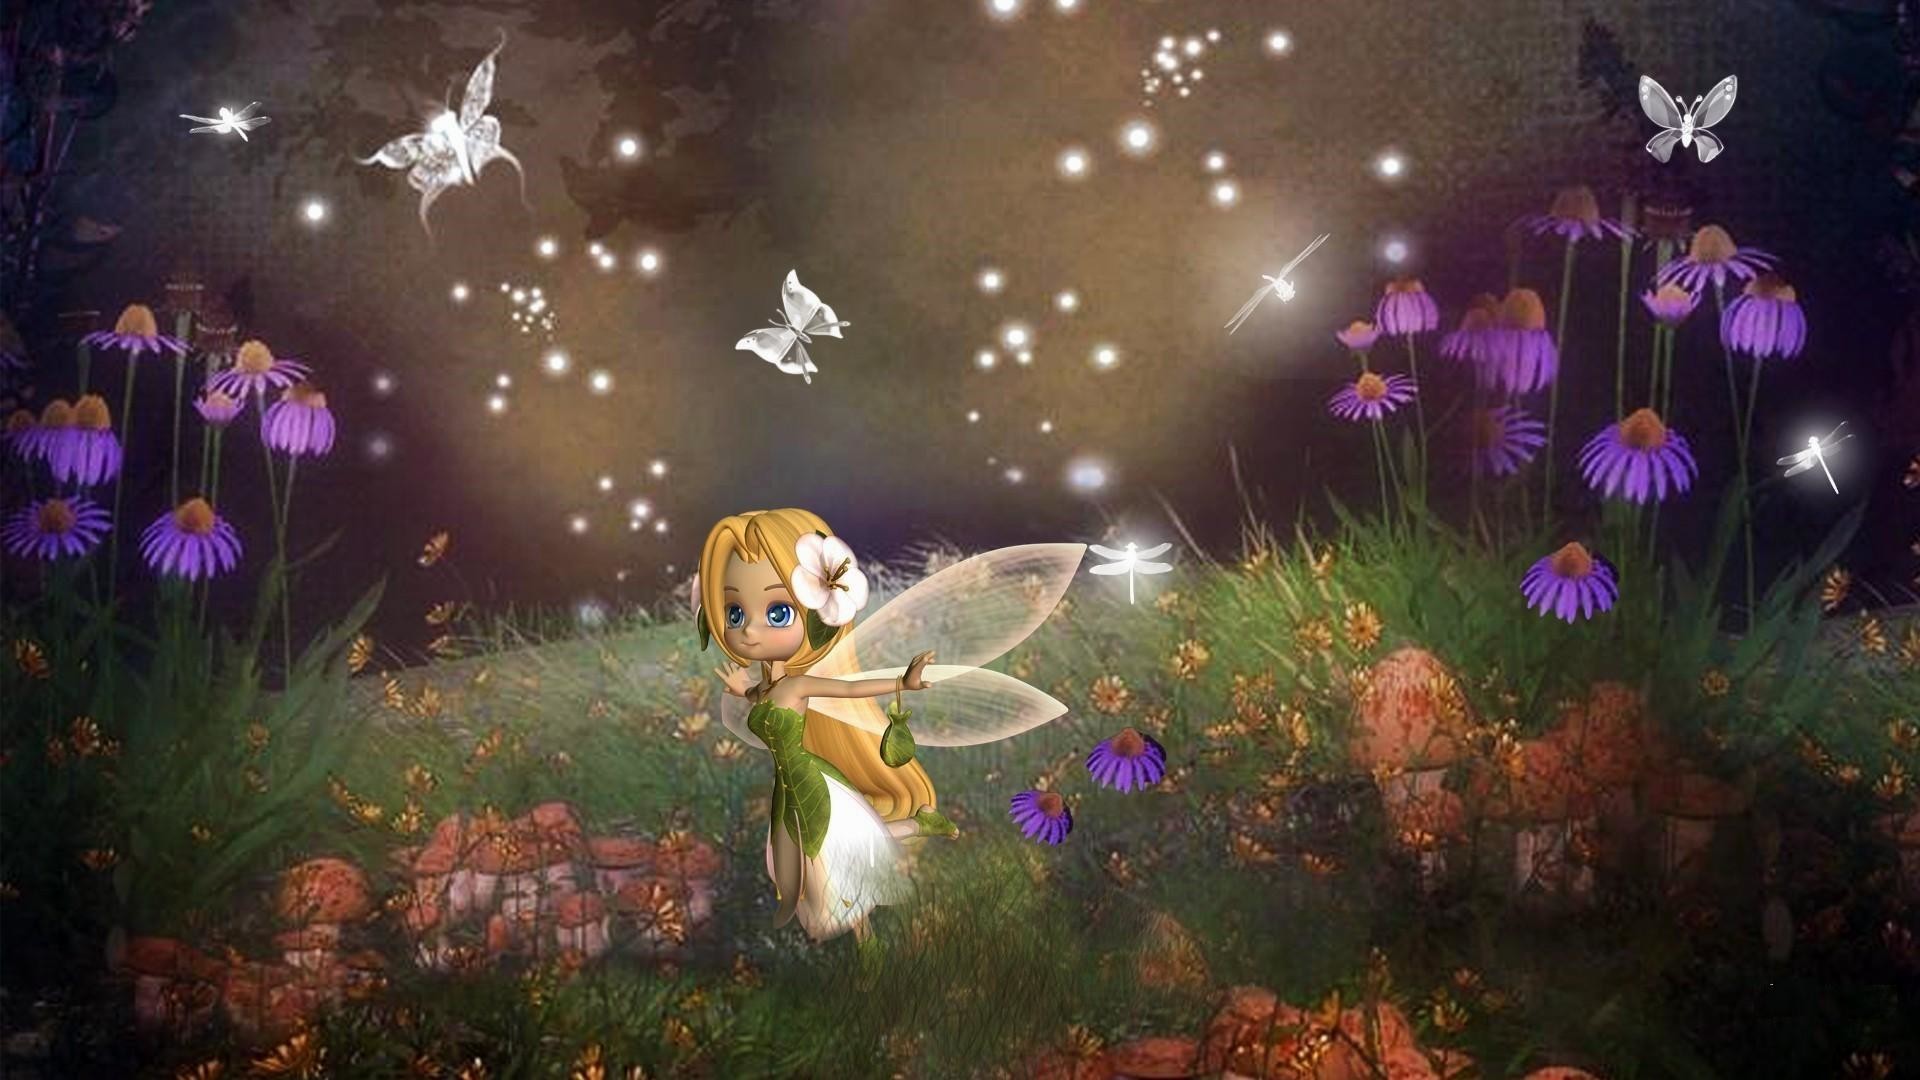 1920x1080 Pictures-download-fairy-wallpapers-HD